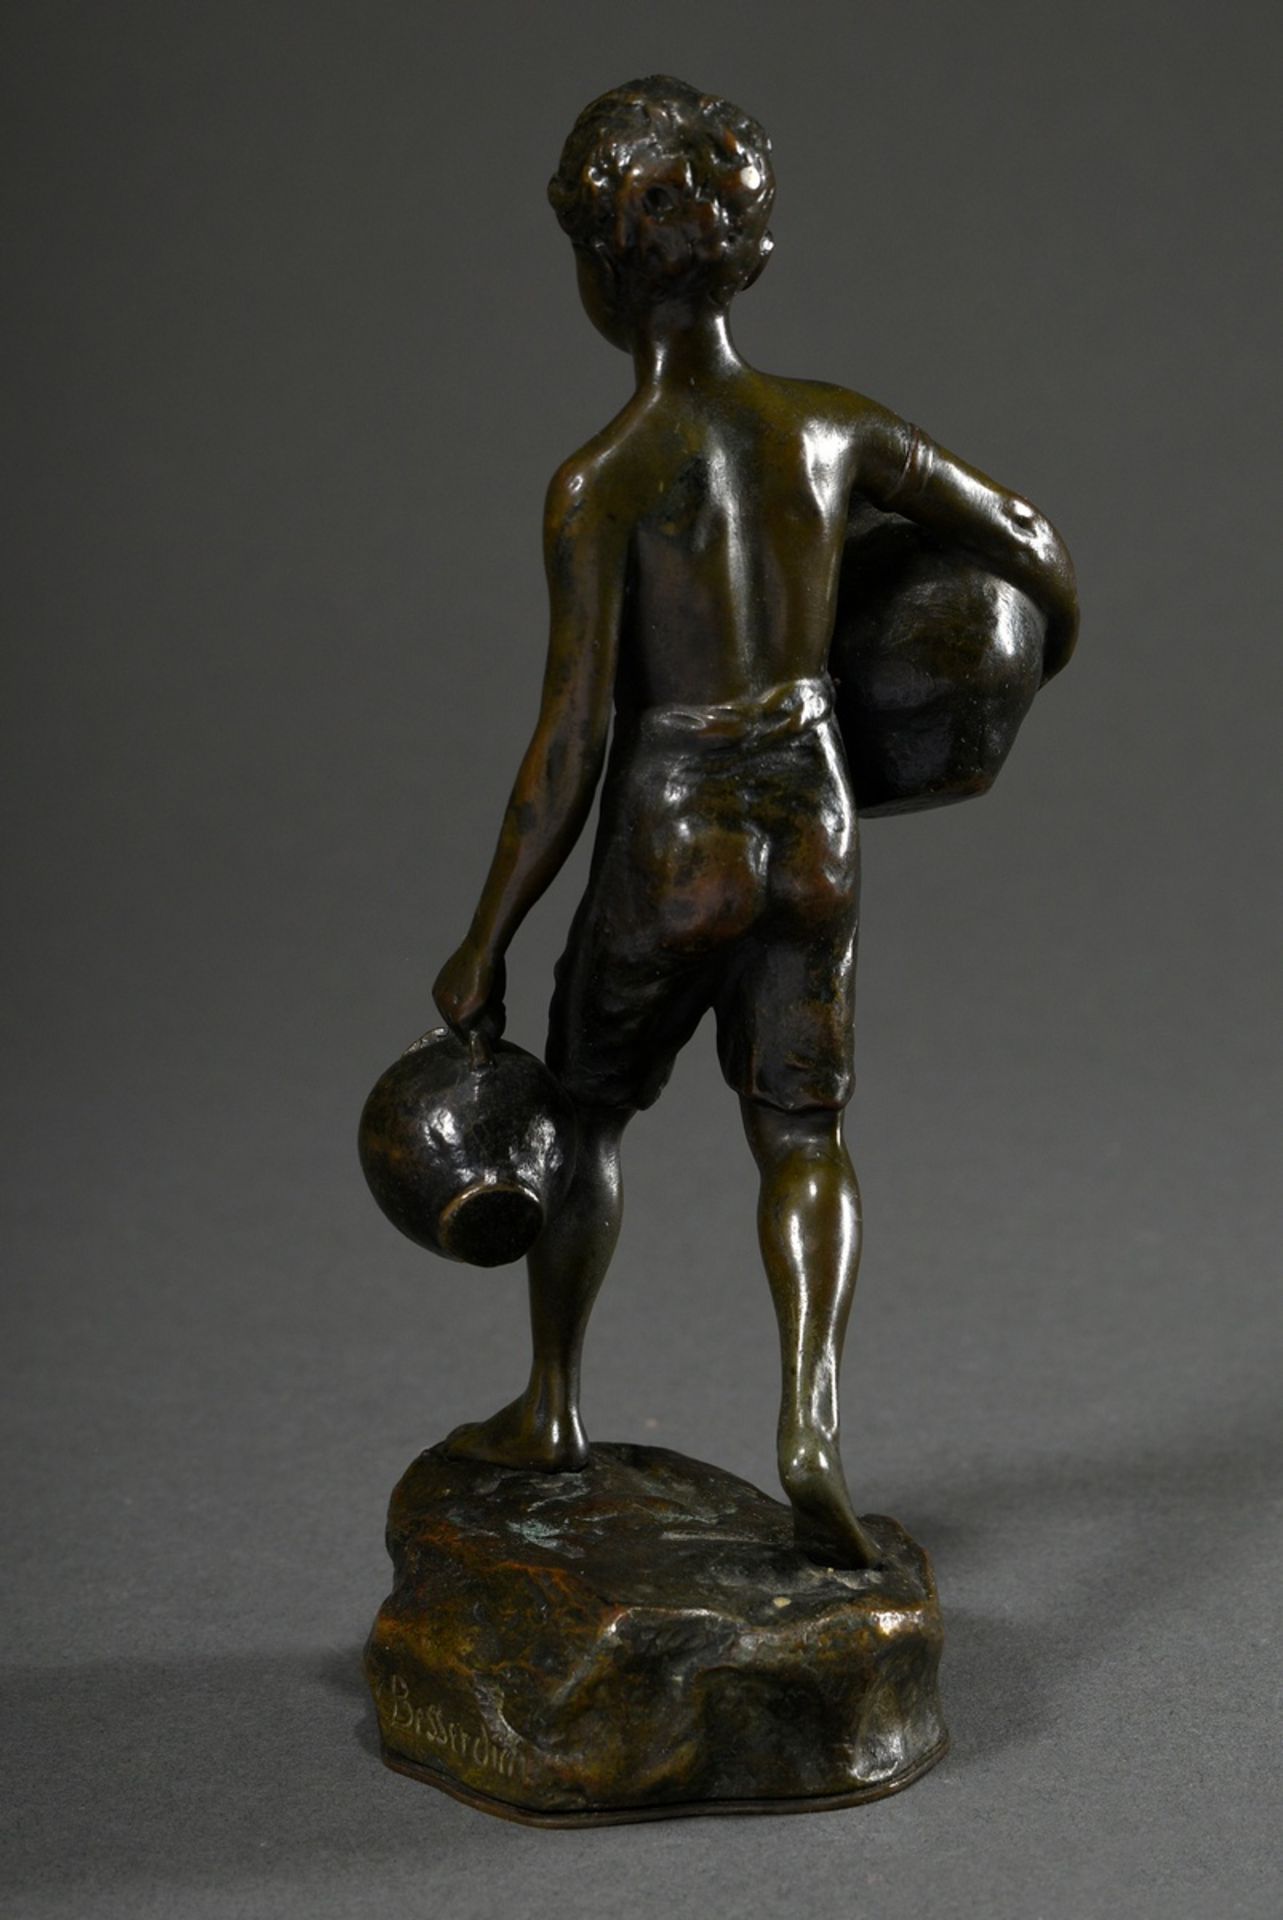 Besserdich, Ruffino (1852-1915) "Water carrier", on a naturalistic plinth, patinated bronze, signed - Image 3 of 6